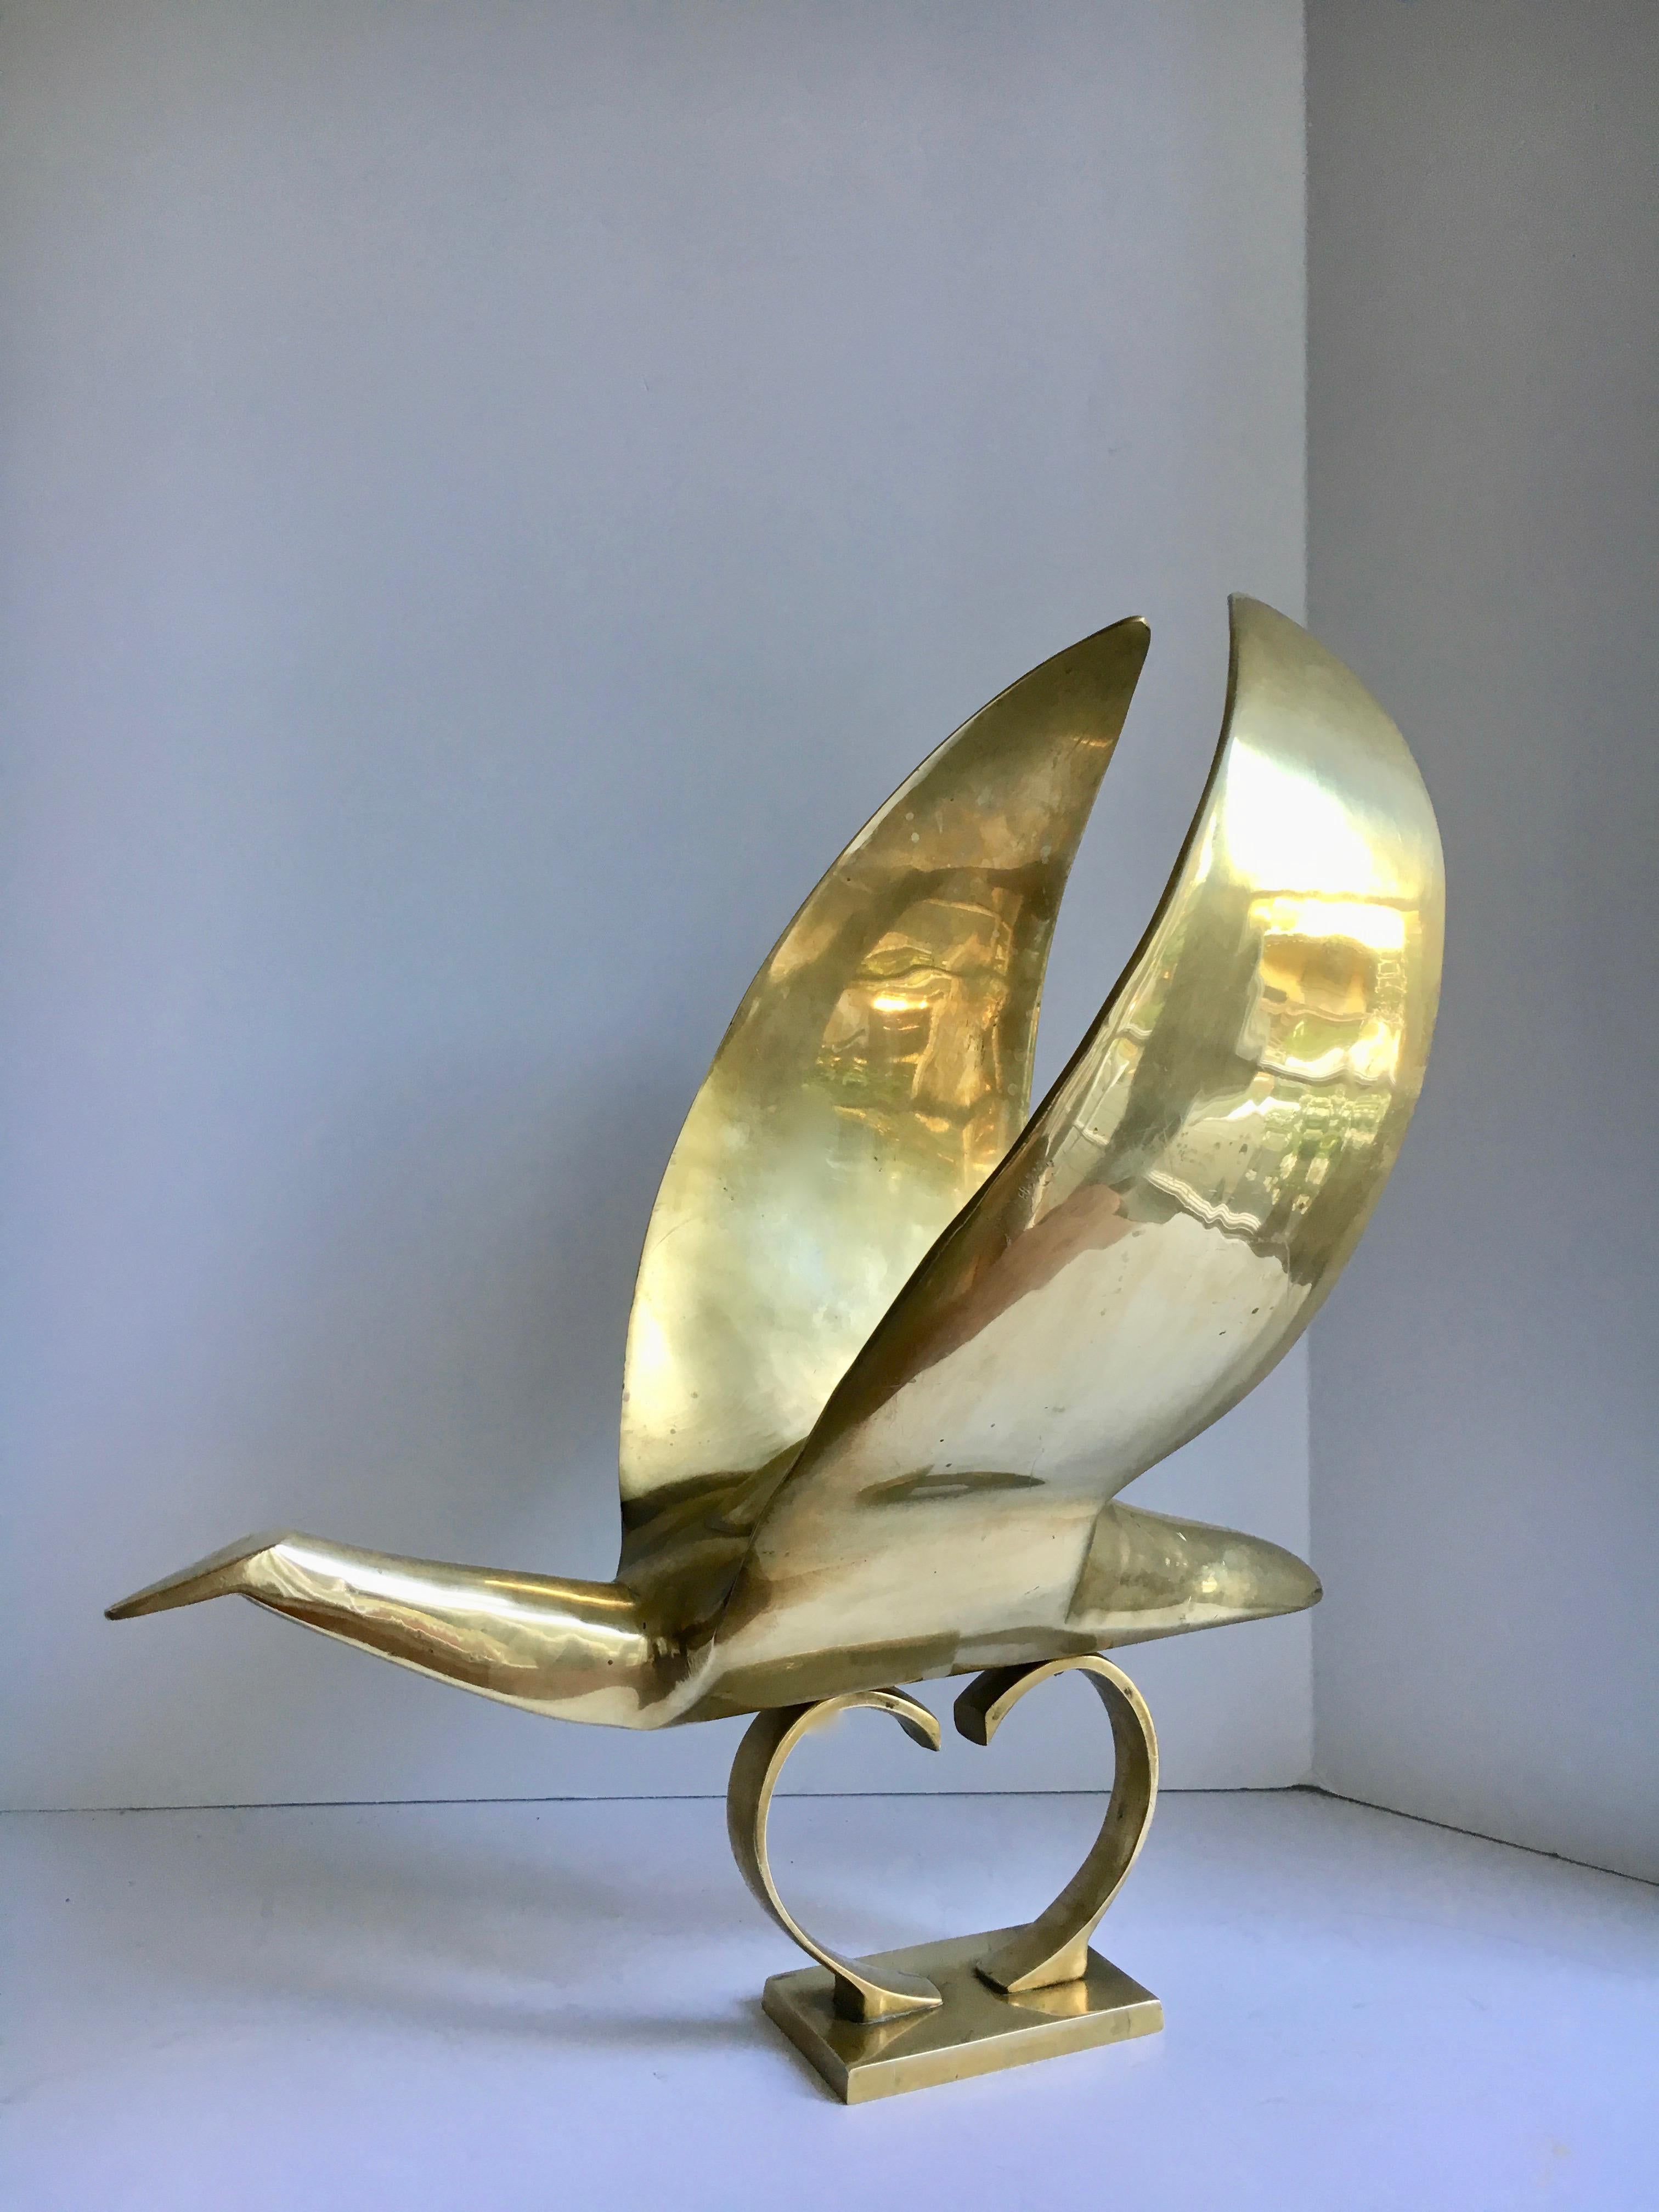 Brass bird sculpture hood ornament - a beauty, this large and impressively architectural sculpture / hood ornament represents a graceful and bold bird in flight.

The piece alone can be a dynamic sculpture - on the practical side a great paper